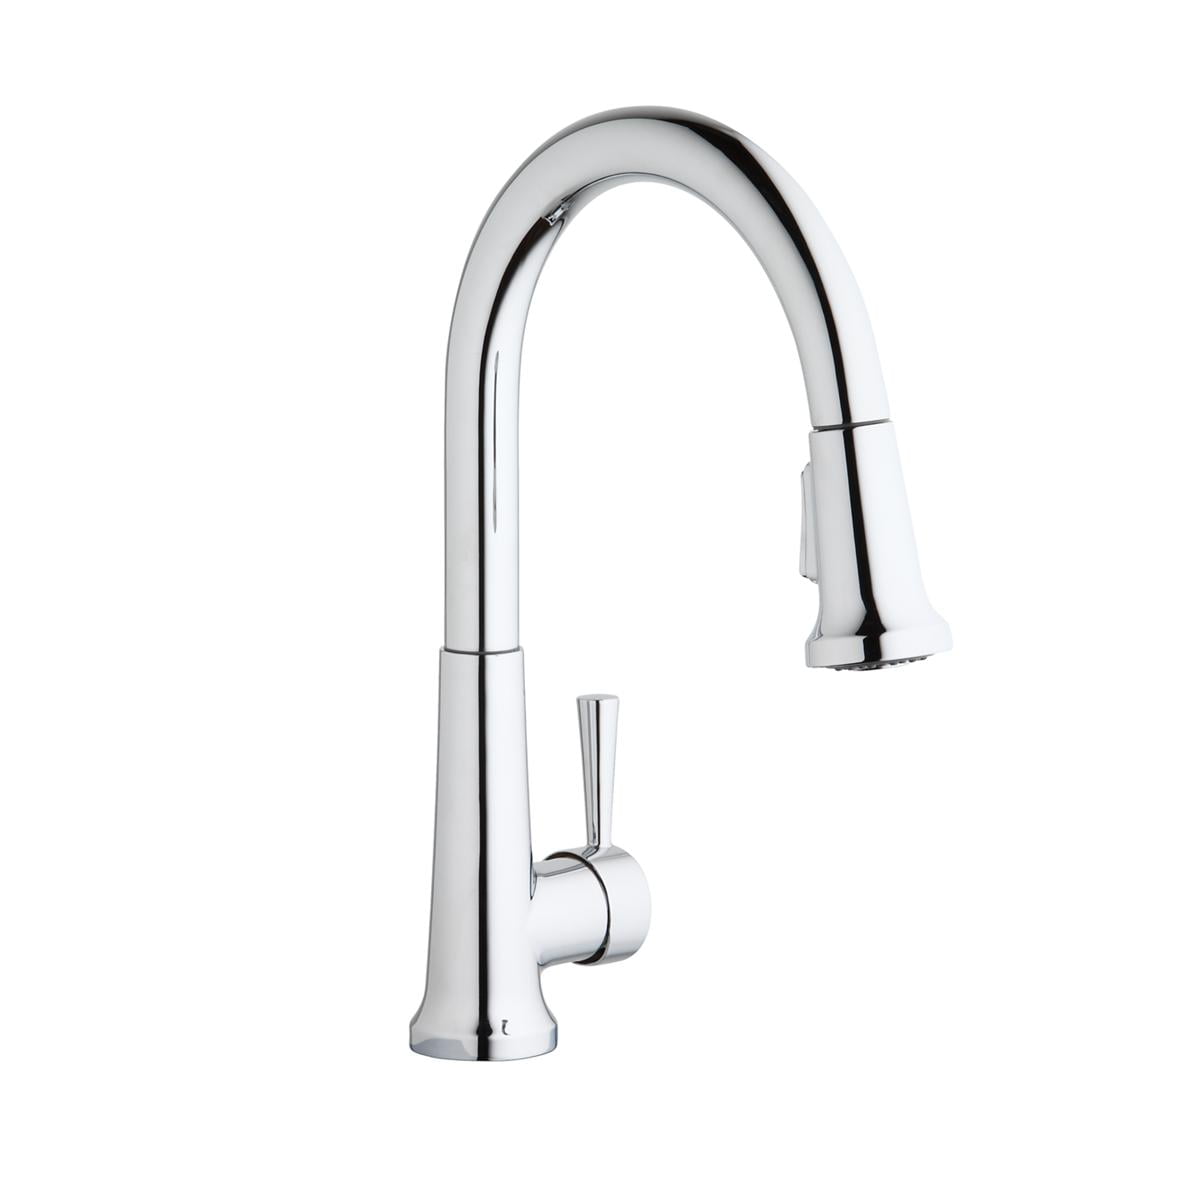 Elkay Everyday Single Pull-down with Faucet Lever Kitchen Forward Spray Mount Deck Only Hole Chrome Handle